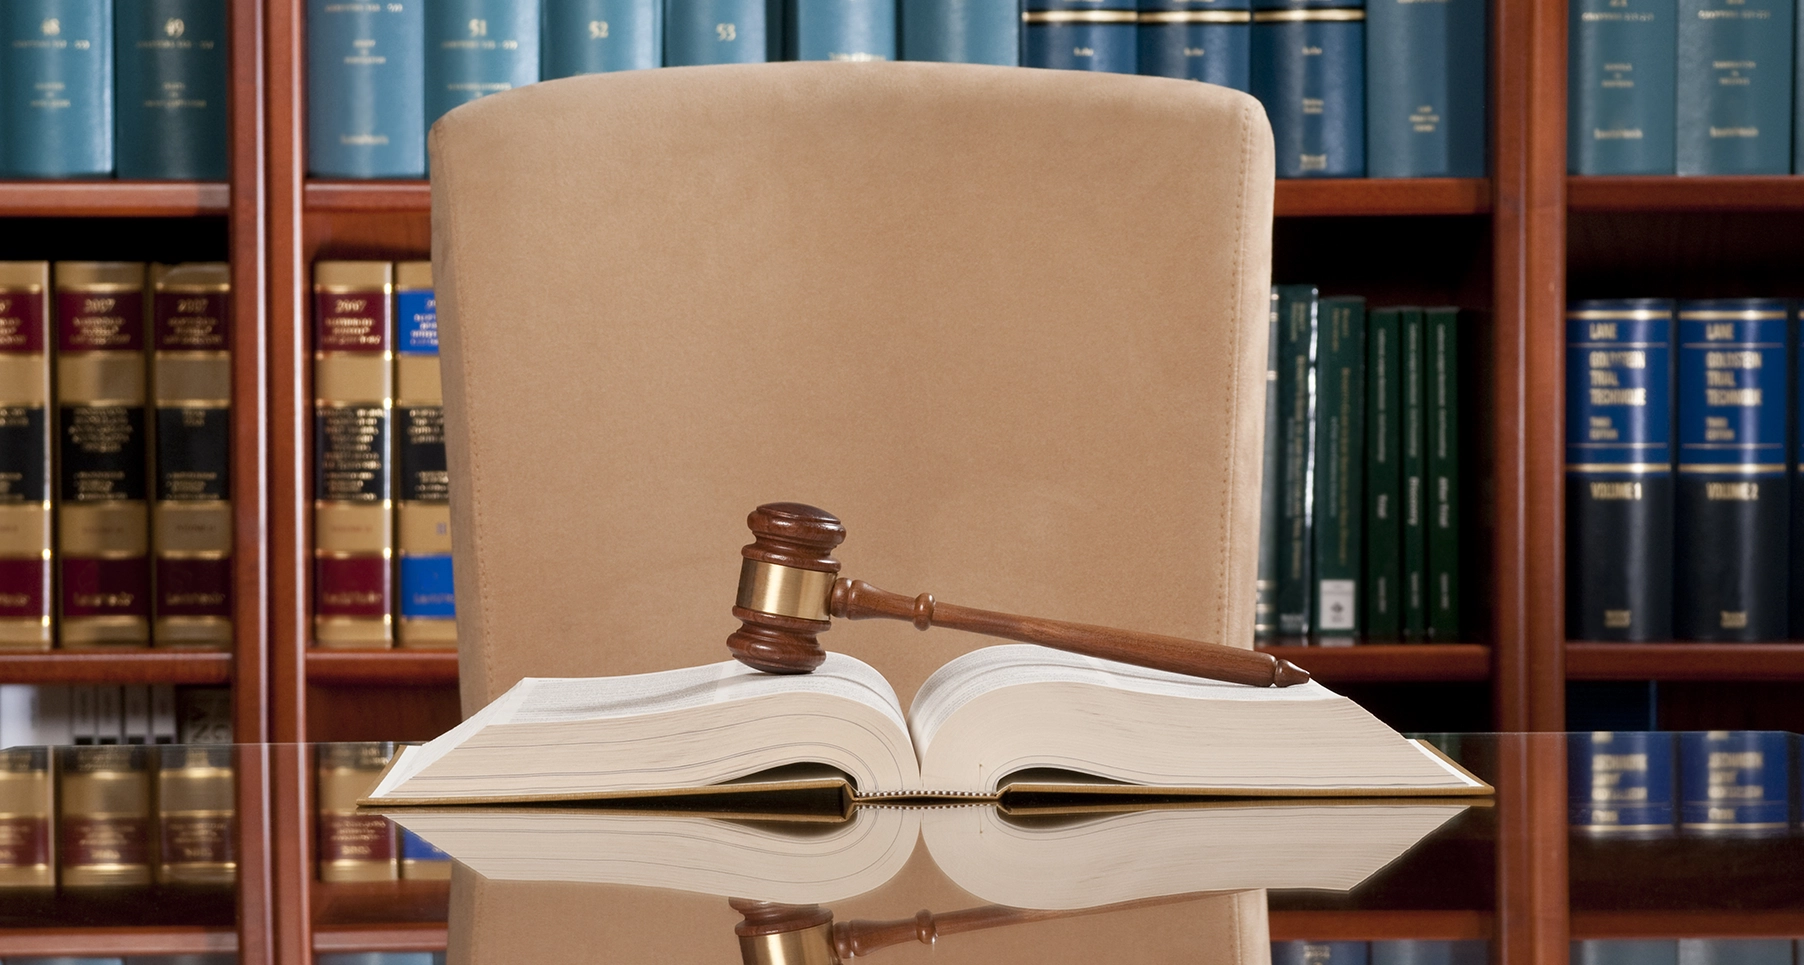 A gavel on top of a legal book with more legal books on shelves in the background.